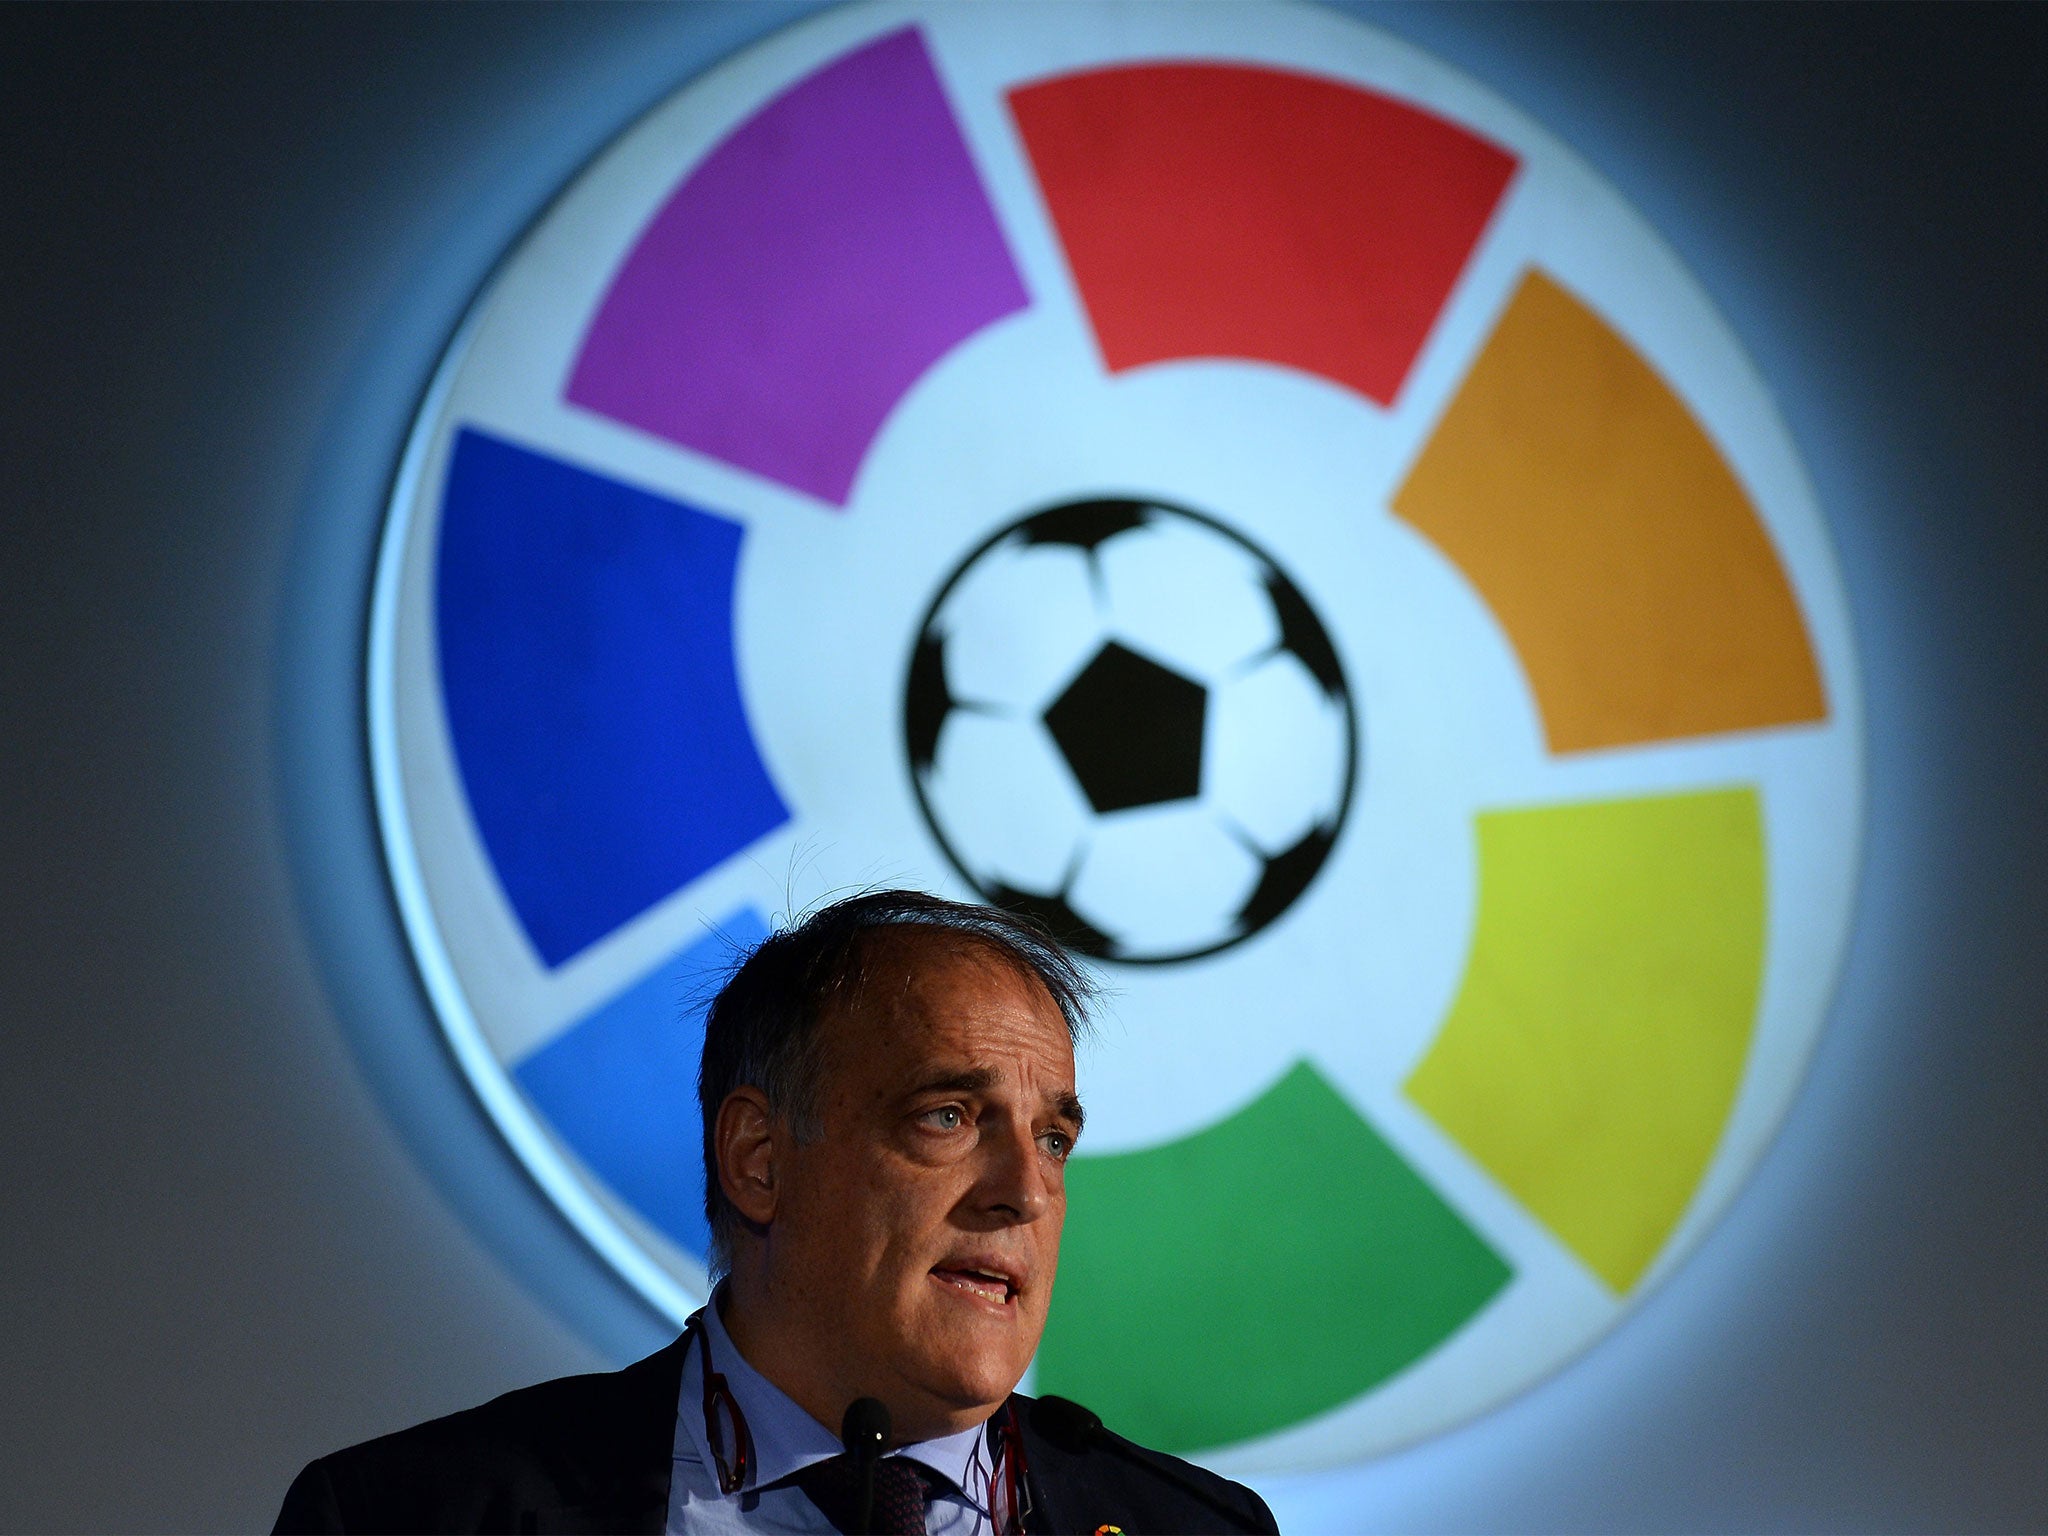 Tebas admitted his support for the far-right party who are looking to scrap domestic violence laws